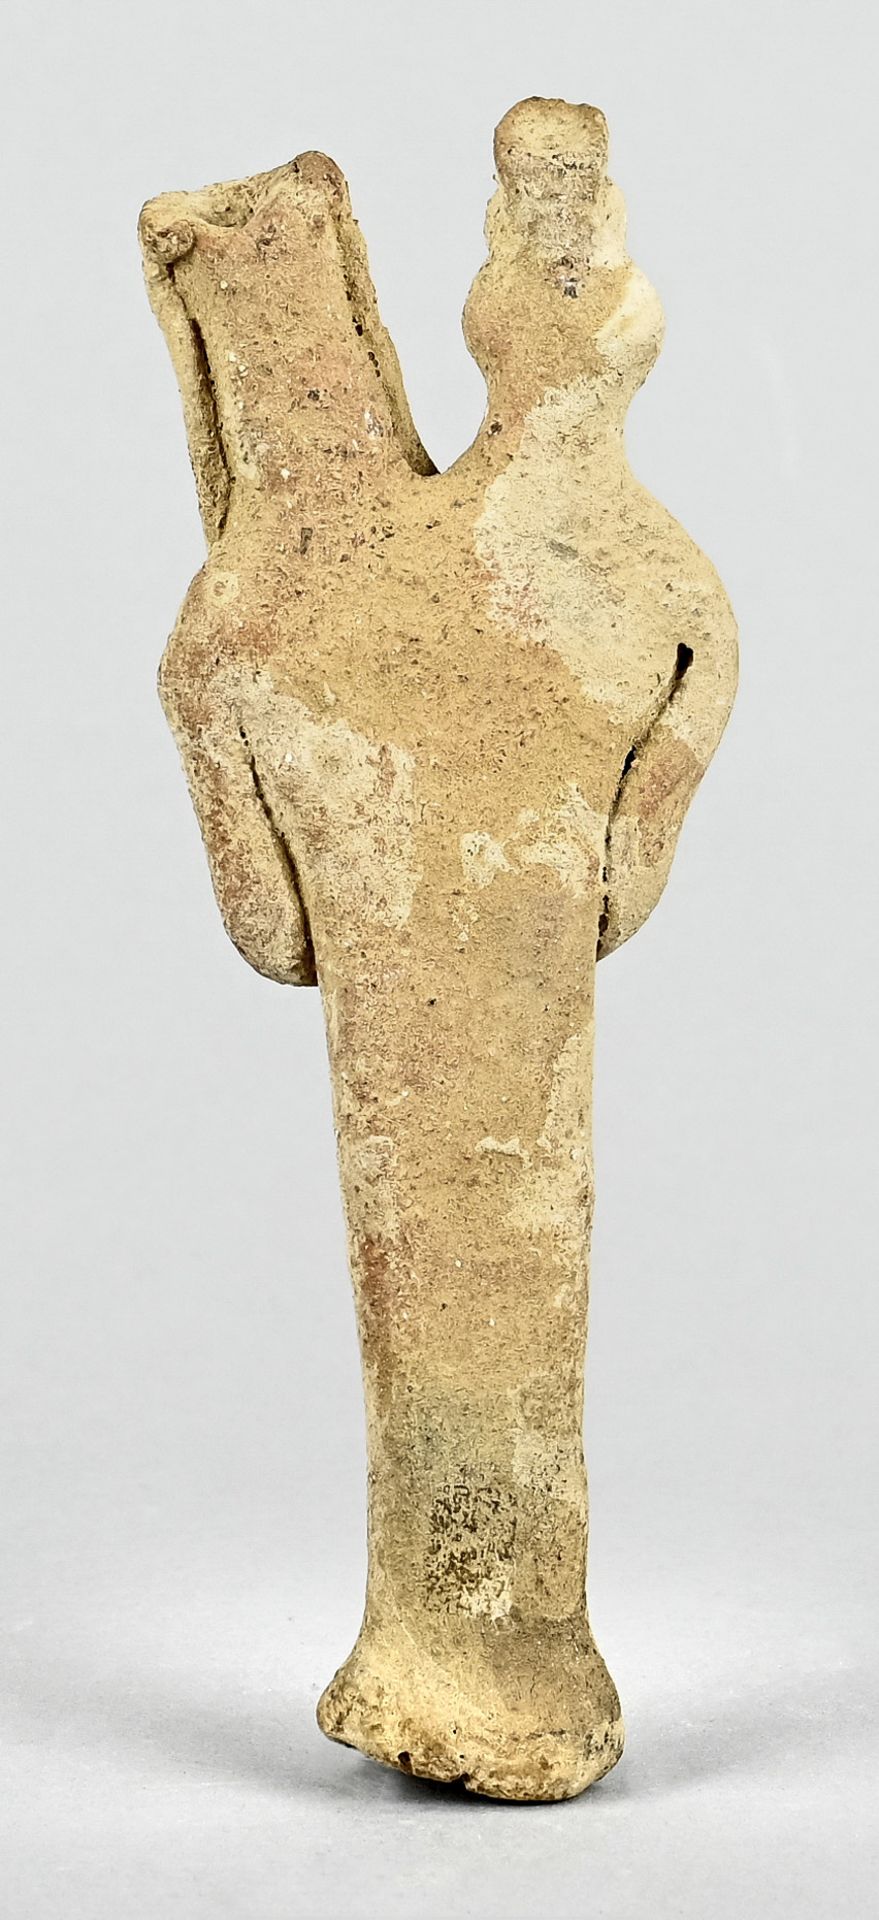 Double headed idol, Anatolia, terracotta, man and woman, two arms in front of the chest on the body - Image 2 of 4